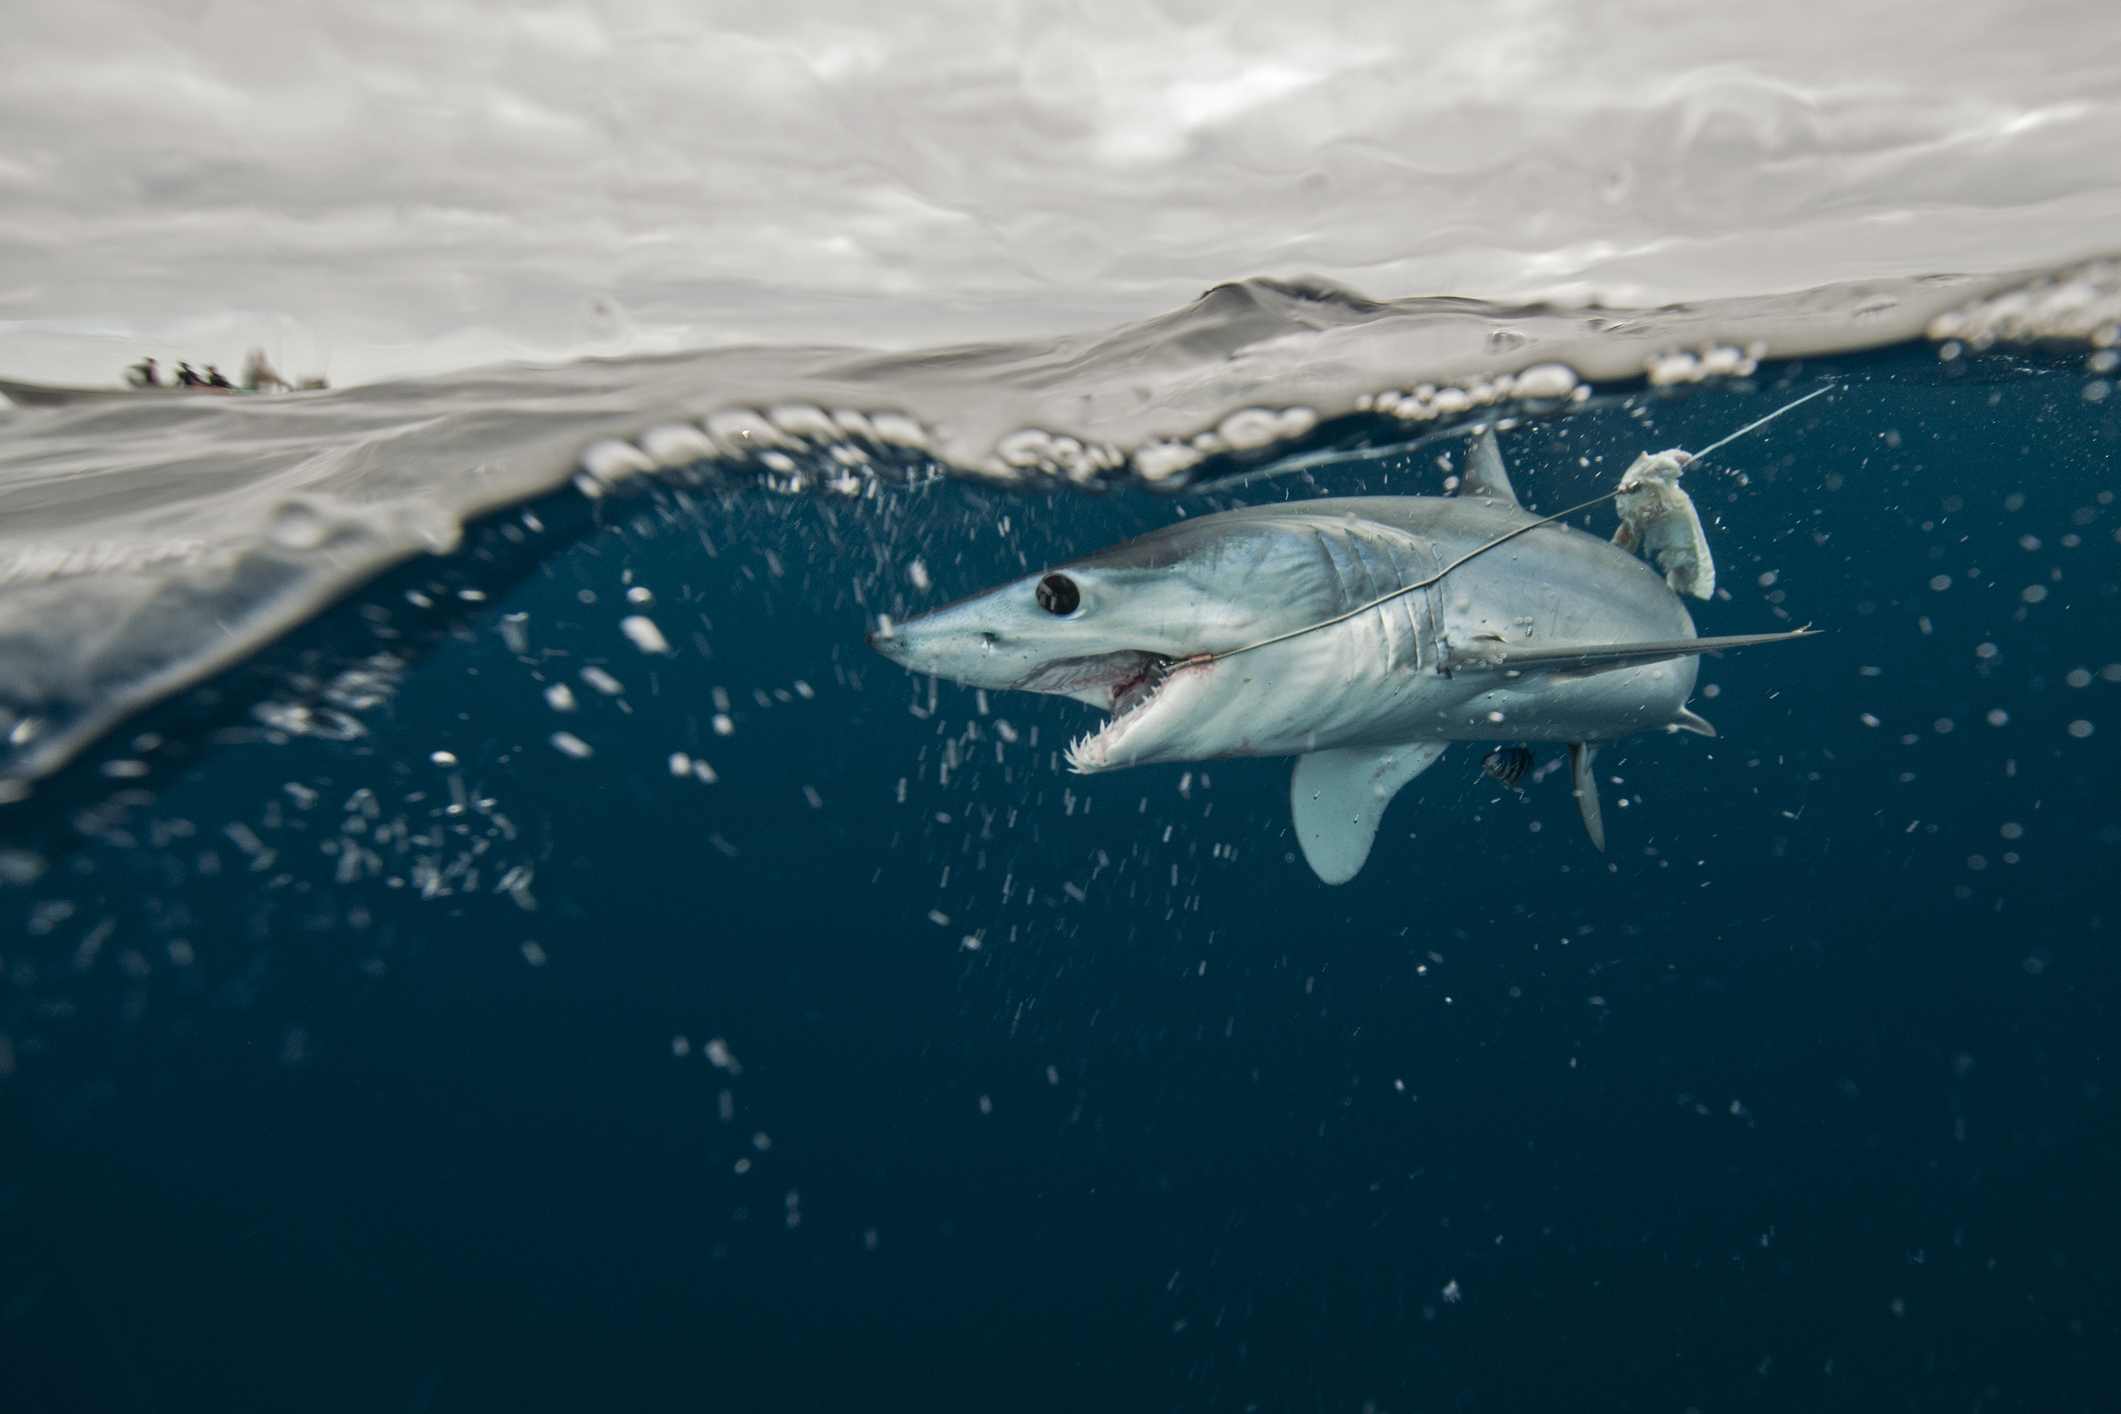 Federal Ban Ends Mako Shark Fishing Fever in the Northeast